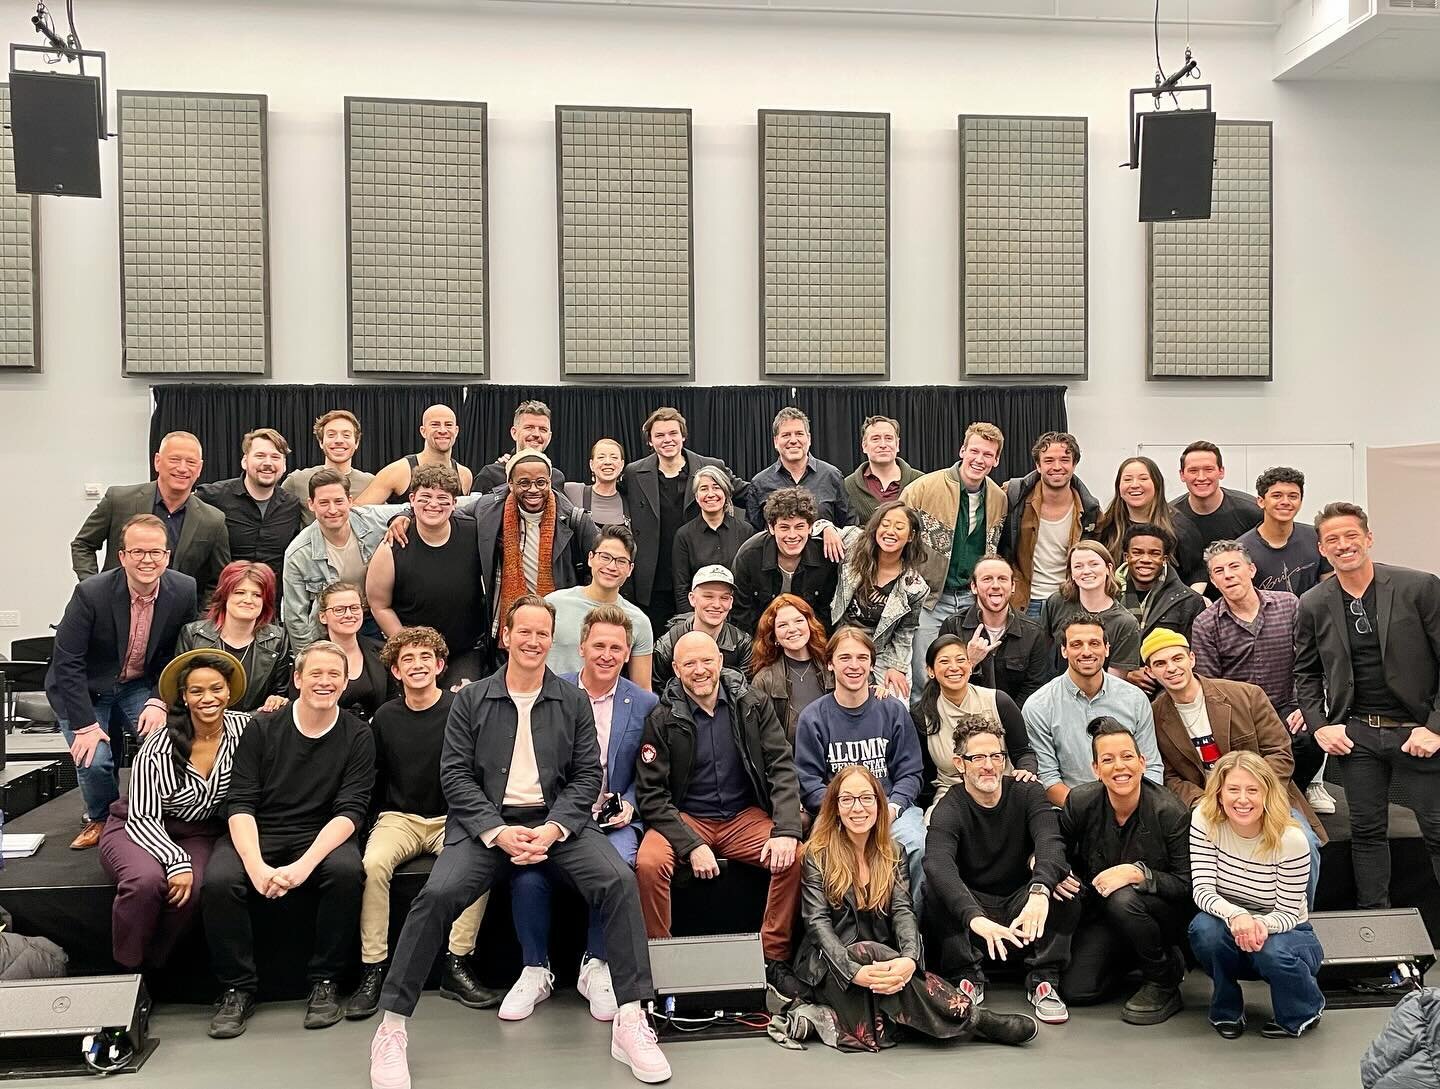 Spent the last two weeks in the Murder Capital of the World! Incredibly cool rocking out to @lostboysmusical with this incredibly talented company (when I&rsquo;m not busy being awestruck by everyone, of course)! 🧛🏻&zwj;♂️

Thank you @michaelarden,